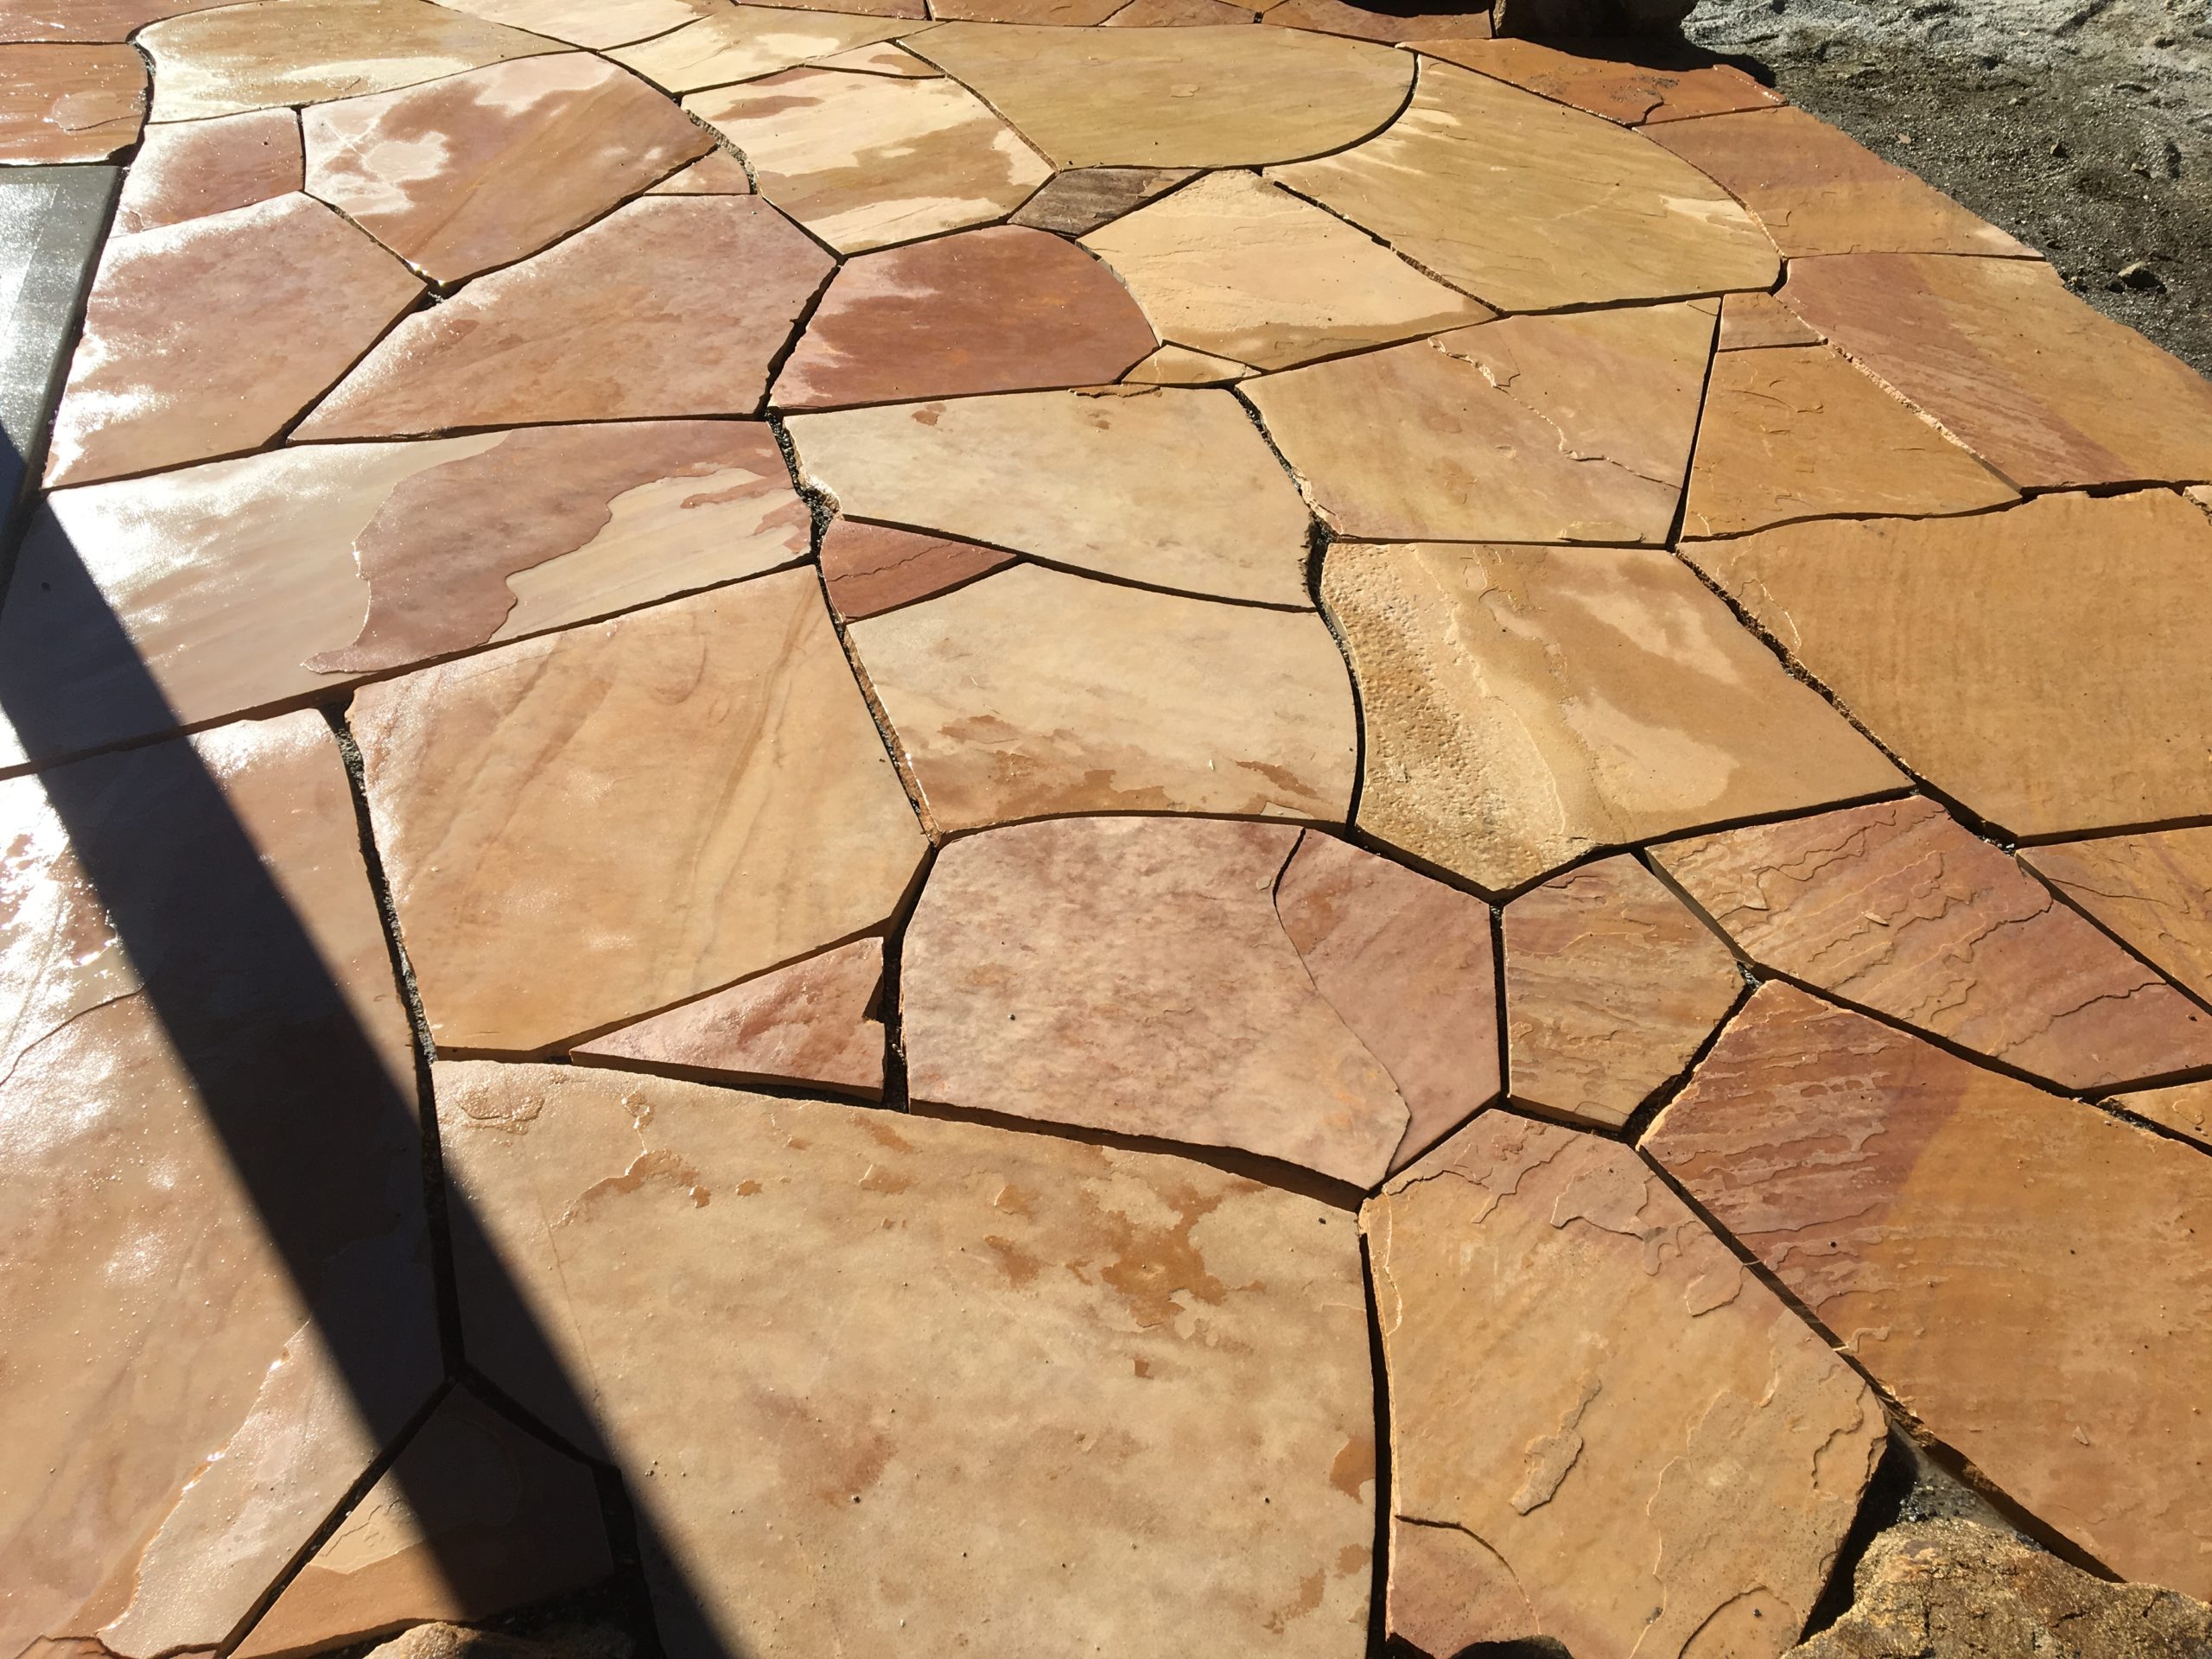 Flagstone patio before grouting